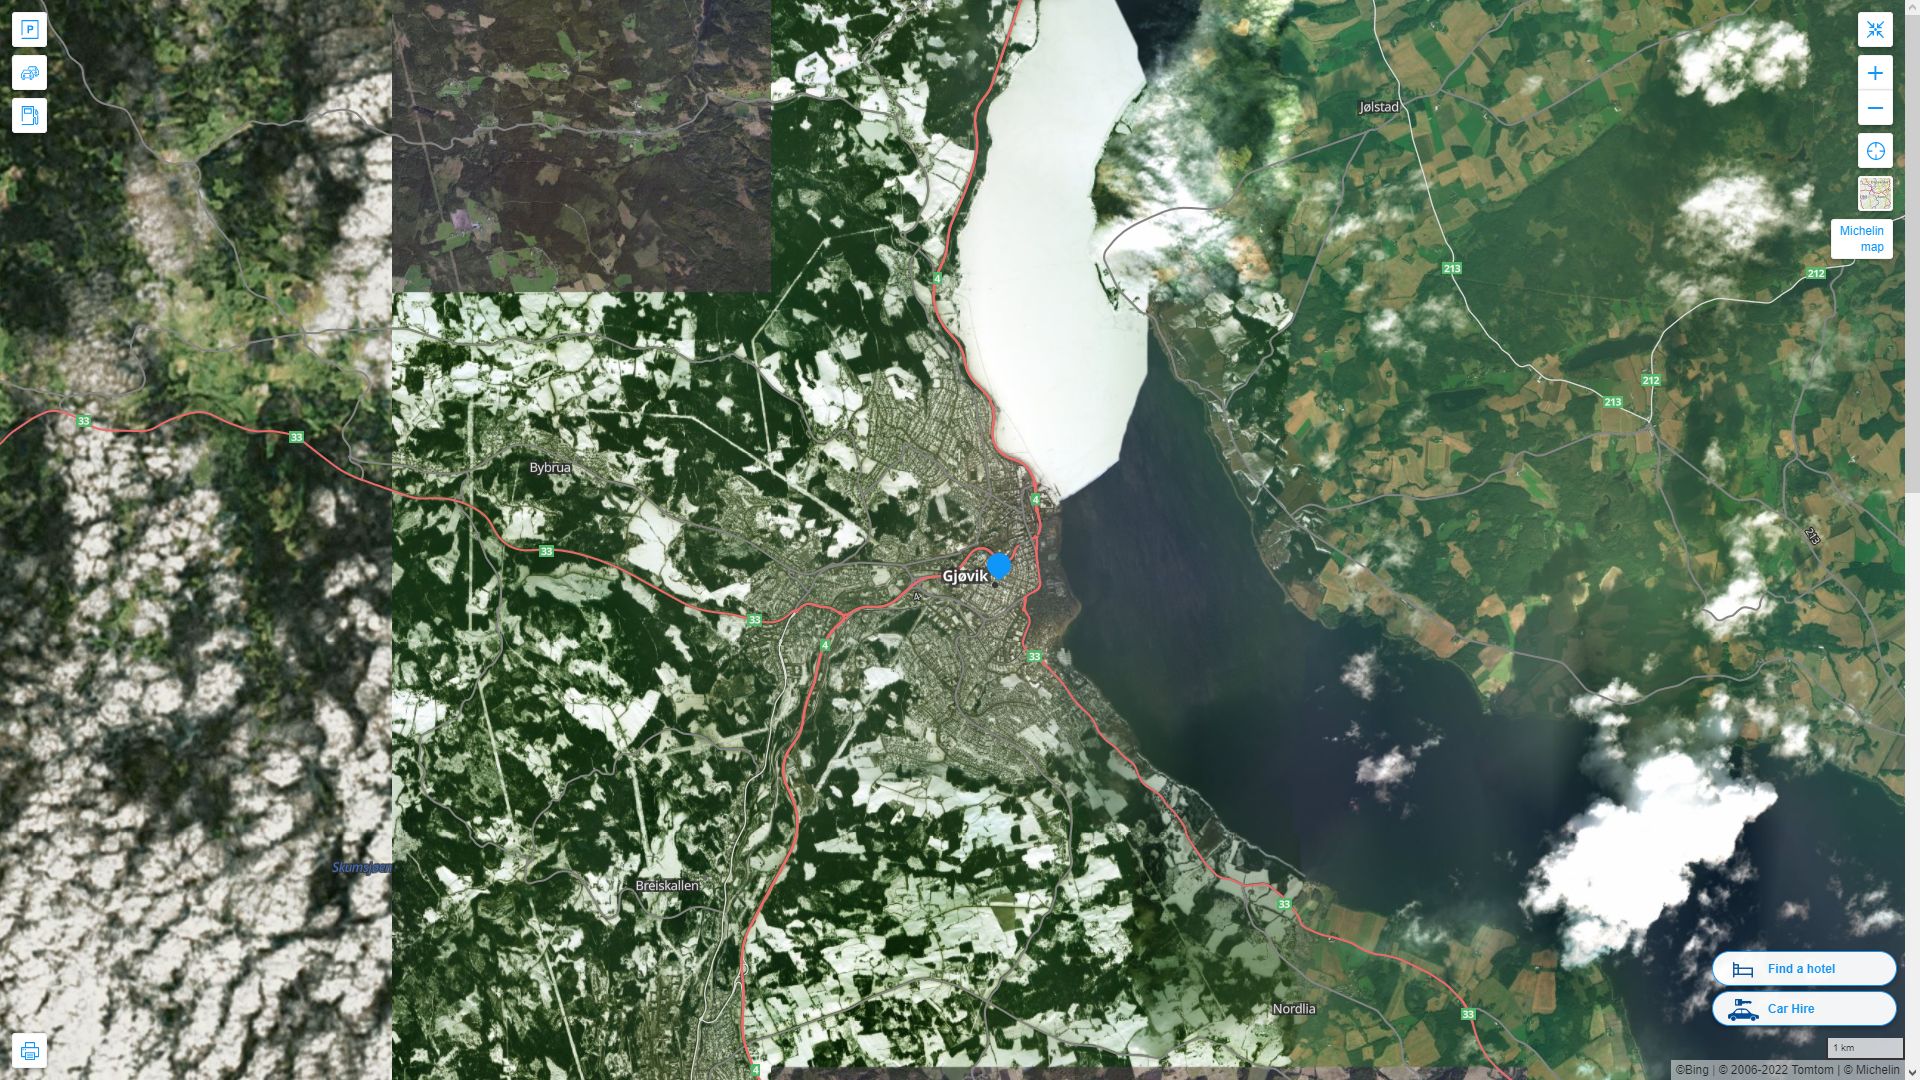 Gjovik Highway and Road Map with Satellite View